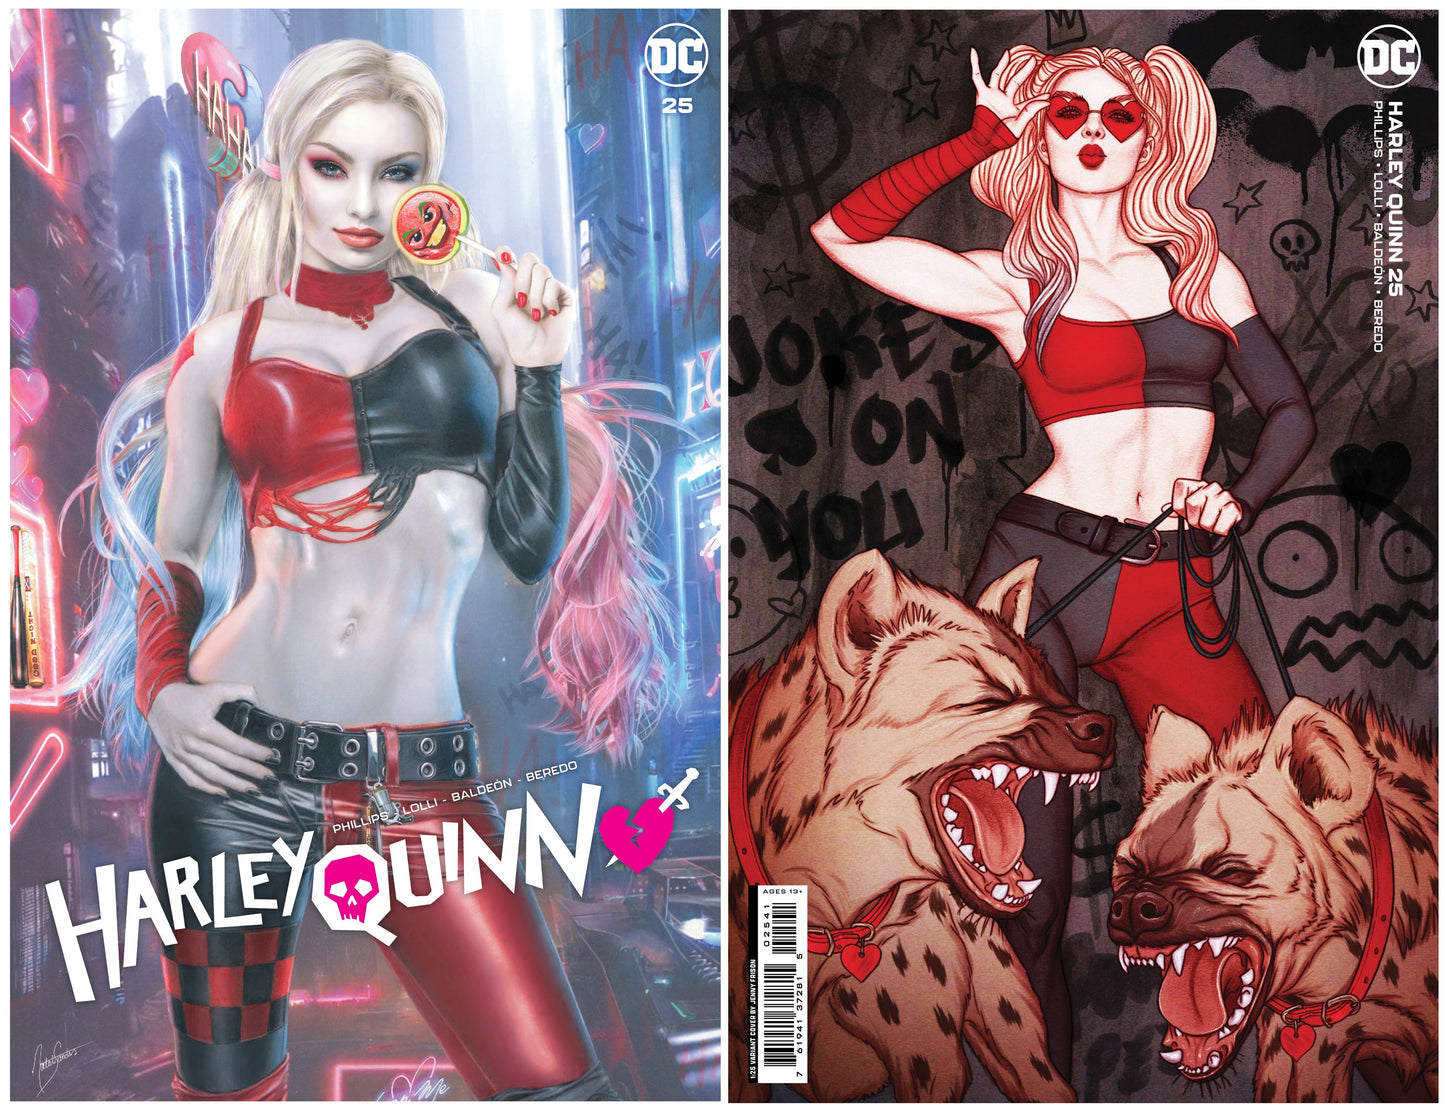 HARLEY QUINN #25 NATALI SANDERS VARIANT LIMITED TO 600 COPIES WITH NUMBERED COA + 1:25 VARIANT